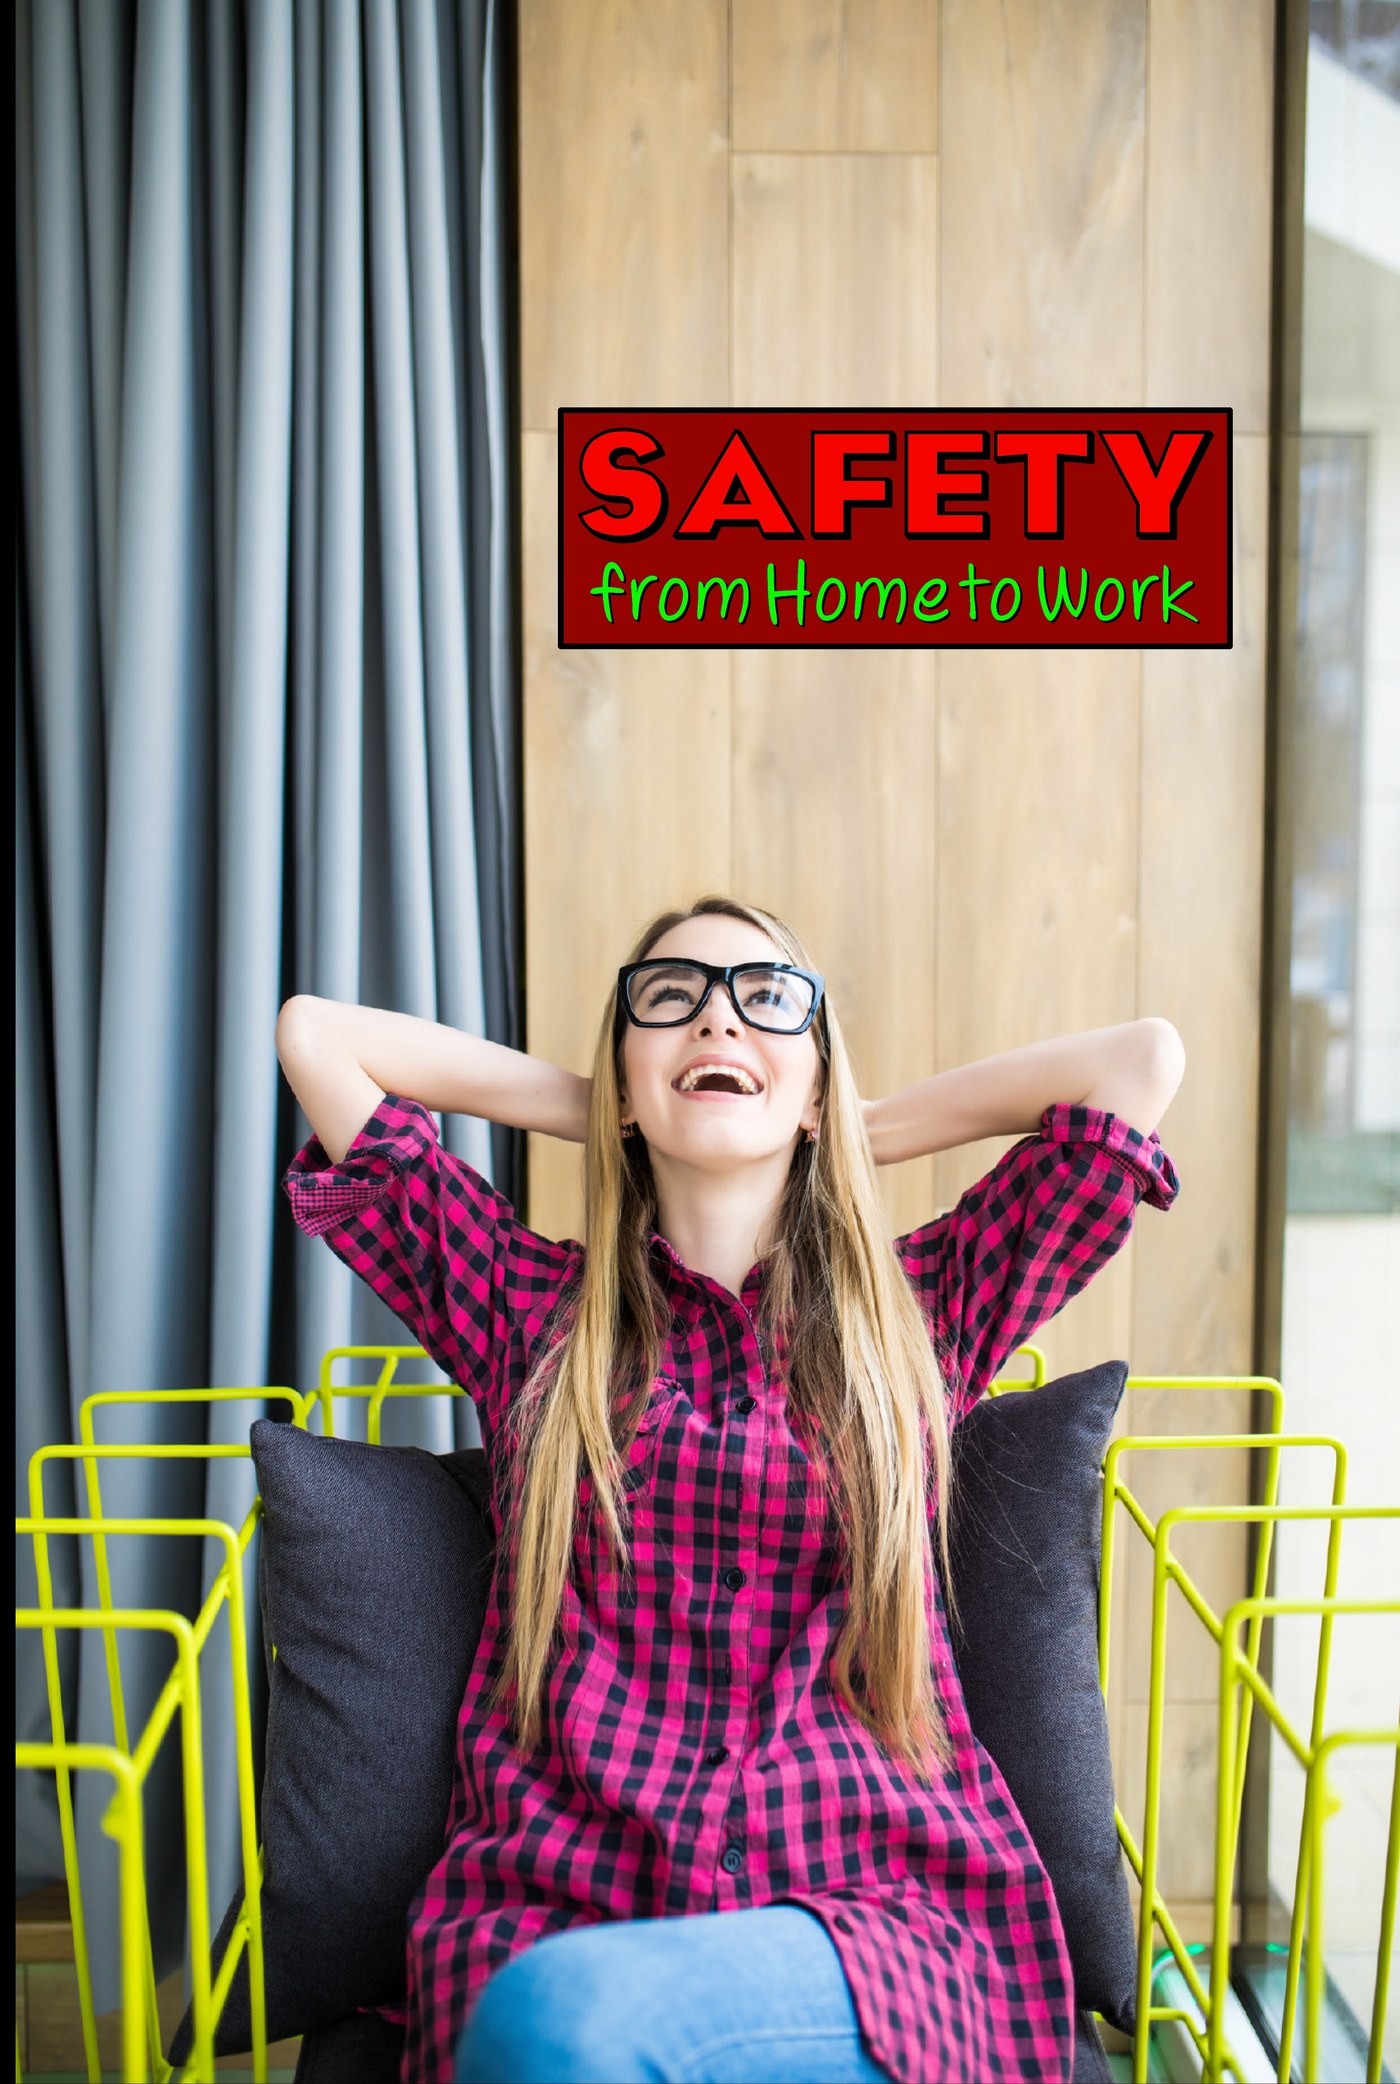 L7077 - Safety from Home to Work